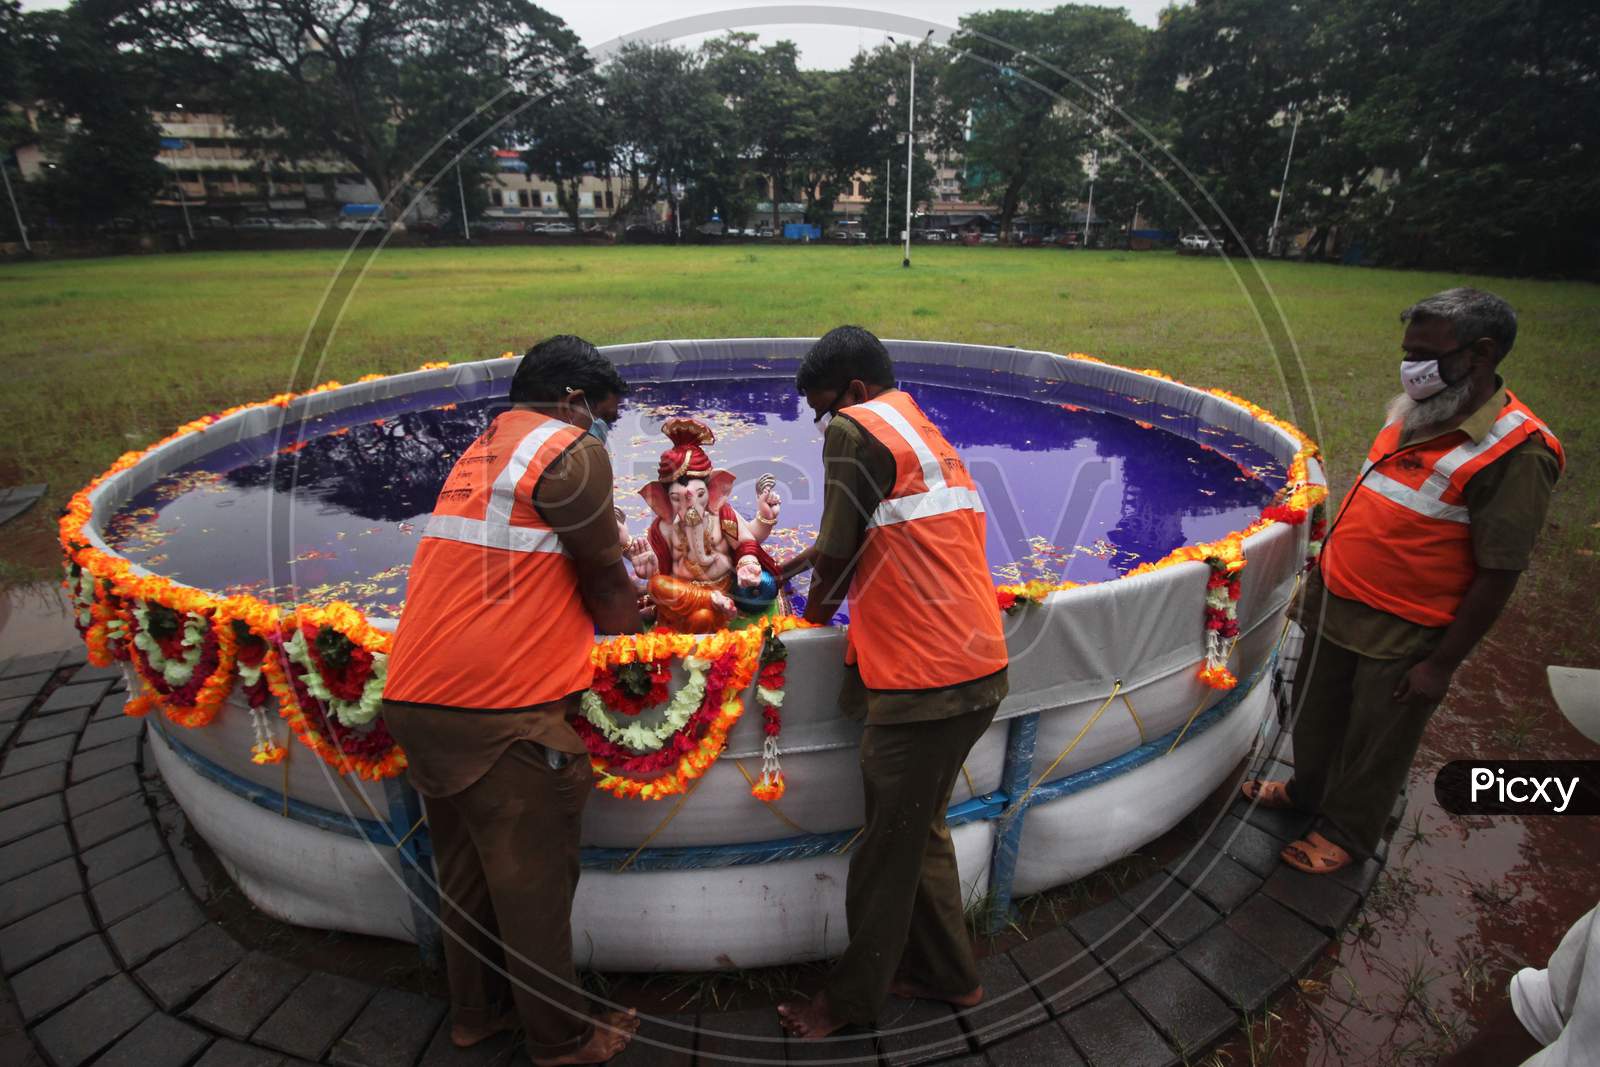 Bmc people immerses an idol of the Hindu god Ganesh, the deity of prosperity, in an artificial pond during the Ganesh Chaturthi festival in Mumbai, India, August 23, 2020.